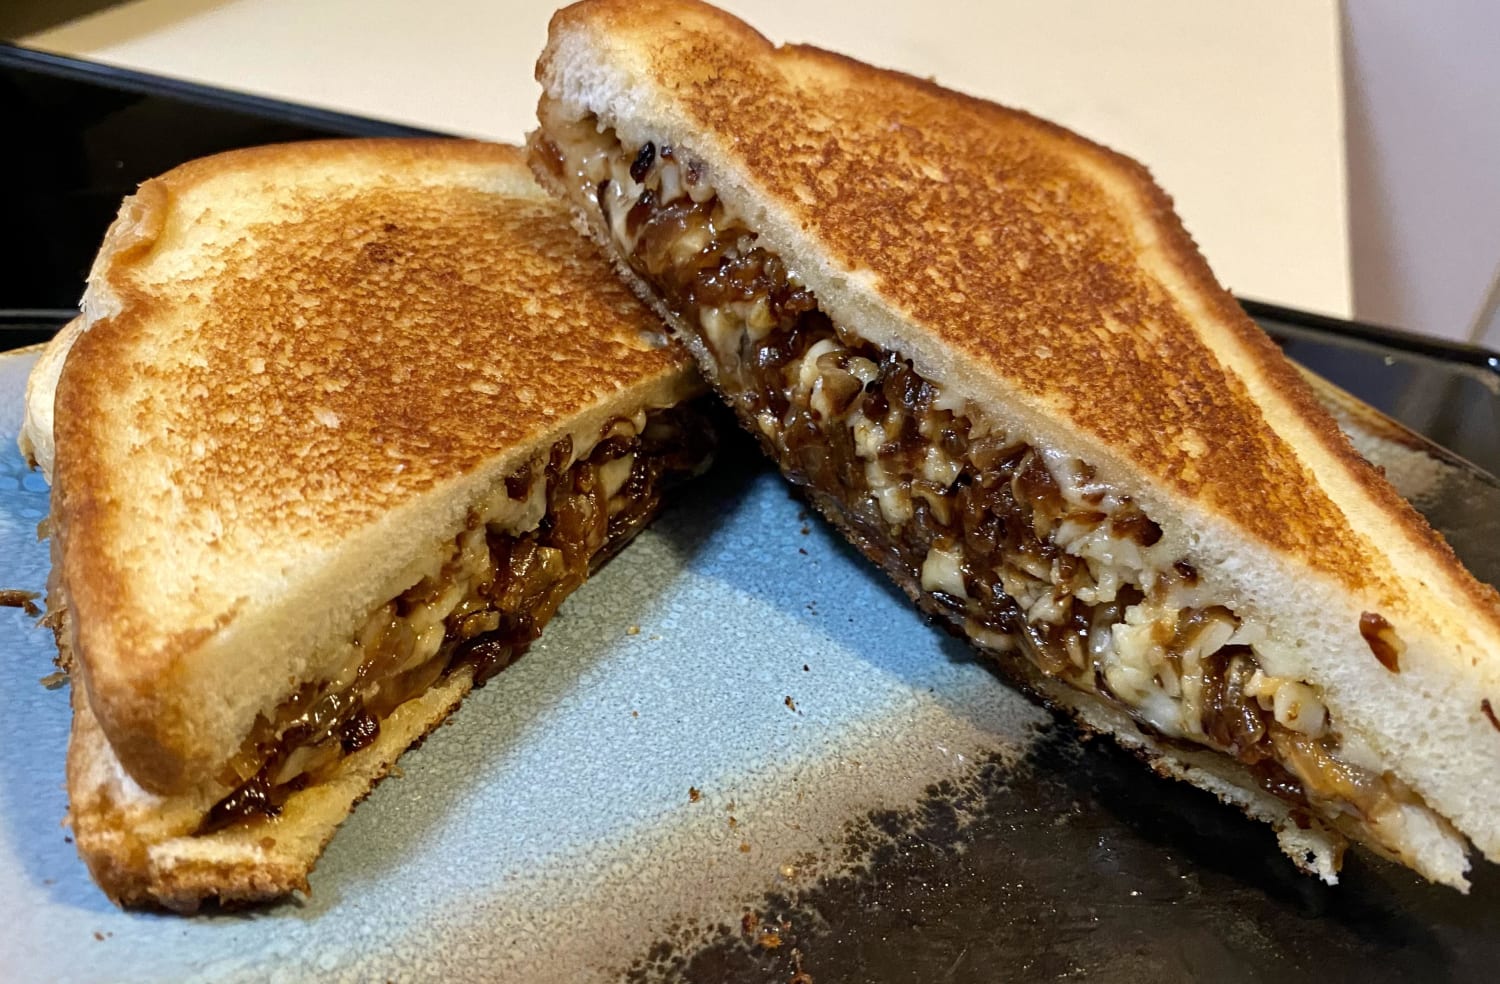 French Onion Grilled Cheese, made for dinner tonight